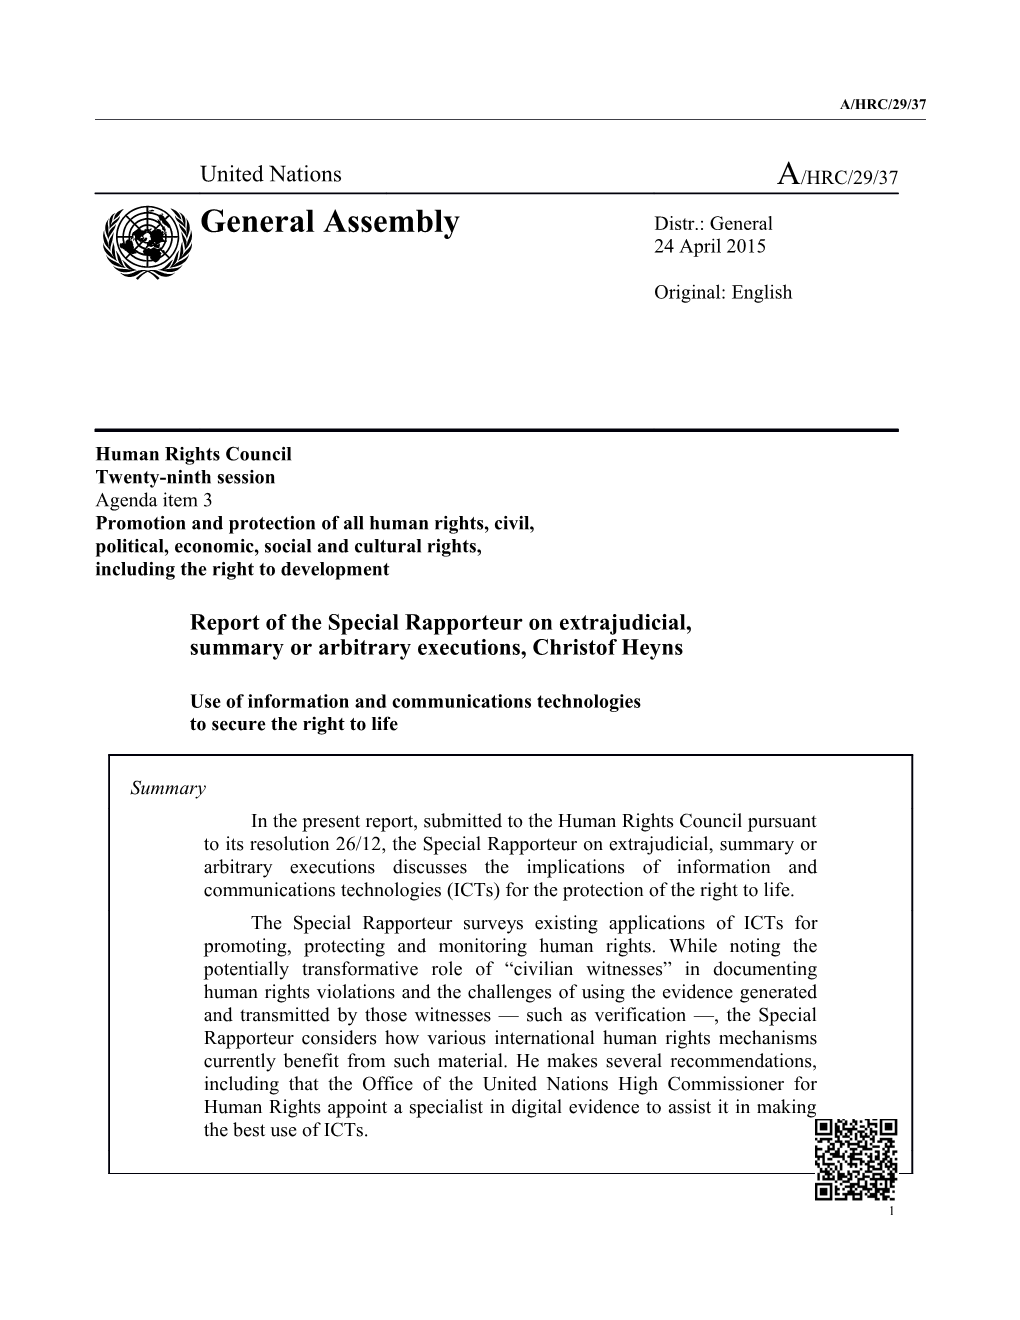 Report of the Special Rapporteur on Extrajudicial, Summary Or Arbitrary Executions in English